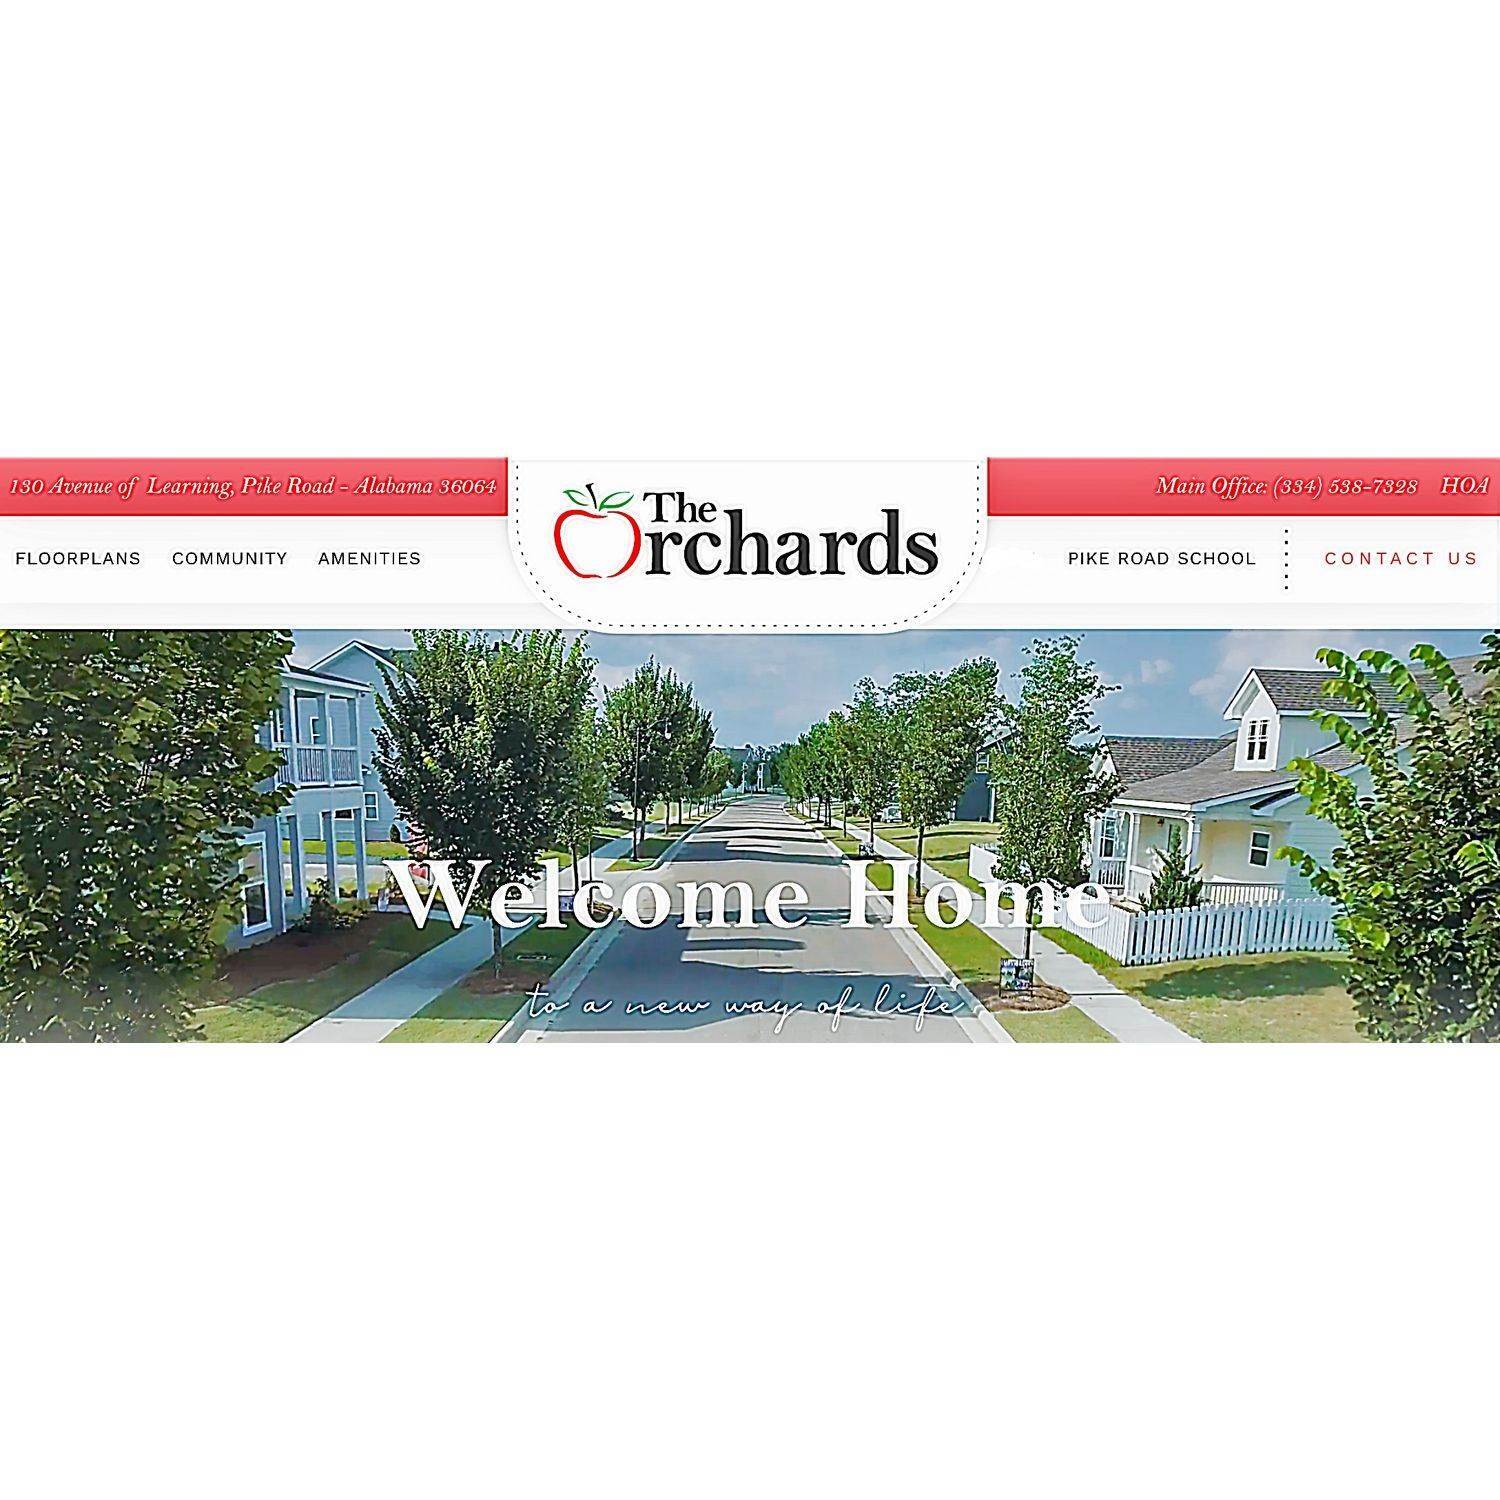 2. The Orchards at Pike Road building at 130 Avenue Of Learning, Pike Road, AL 36064